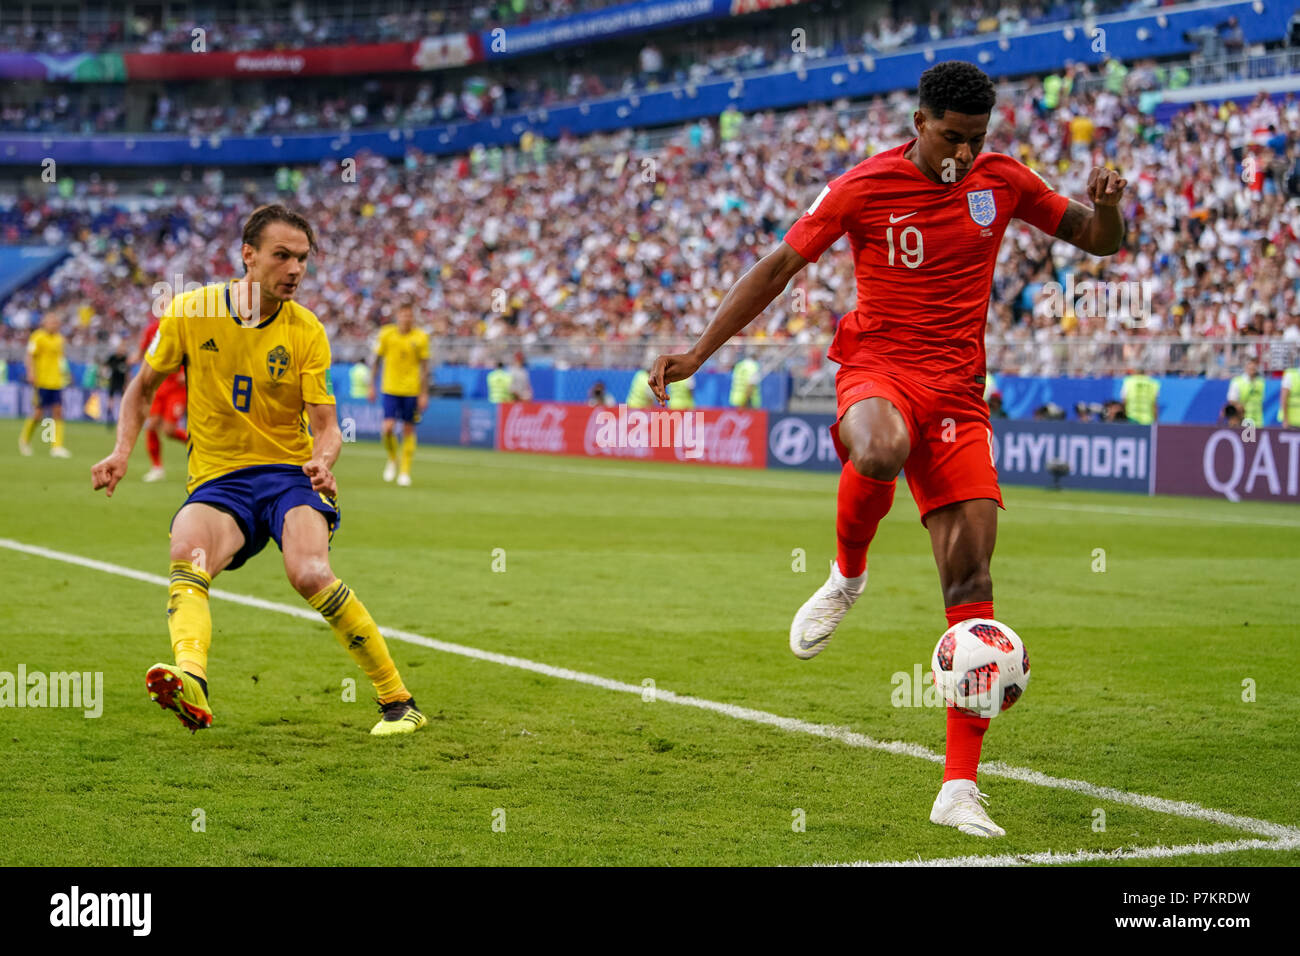 Samara, Russia. 7th July 2018.  Marcus Rashford of England saving the ball before going out at Samara Stadium during the quarter final between England and Sweden during the 2018 World Cup. Ulrik Pedersen/CSM Credit: Cal Sport Media/Alamy Live News Stock Photo